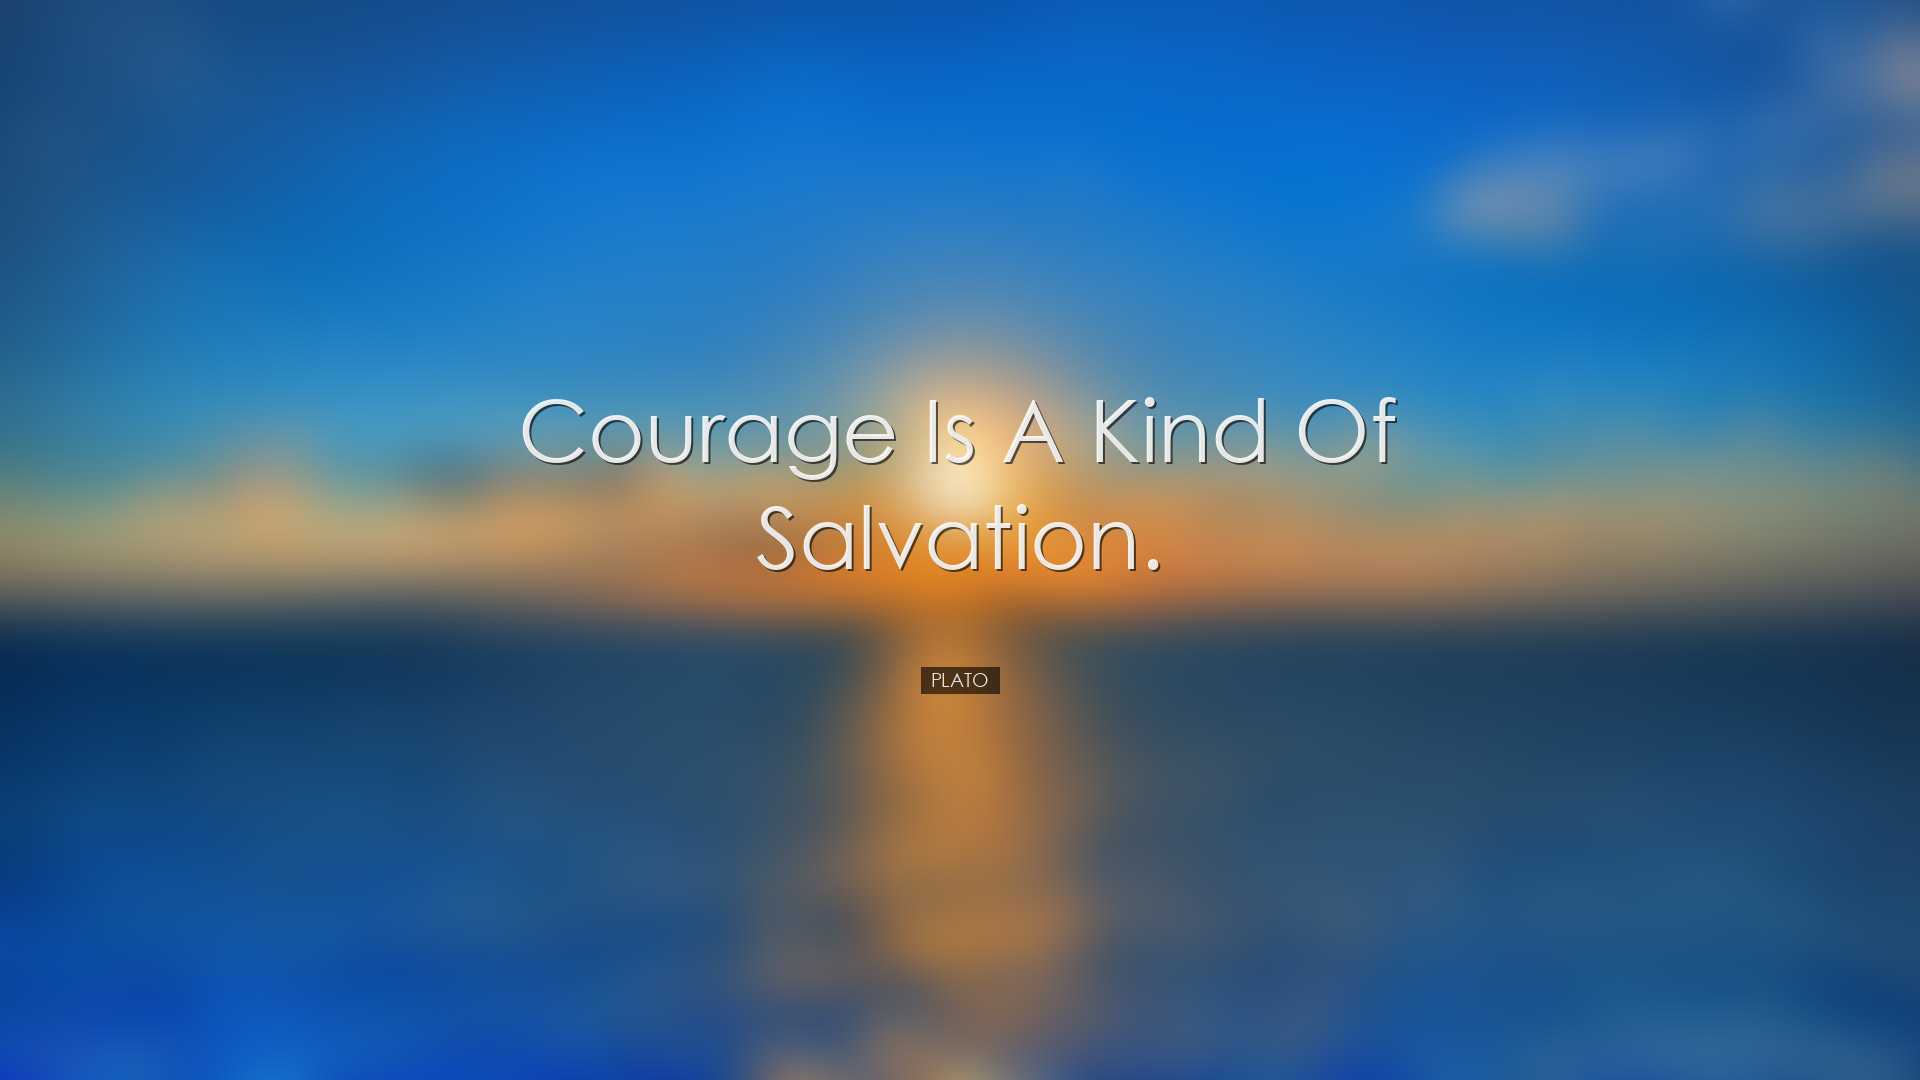 Courage is a kind of salvation. - Plato